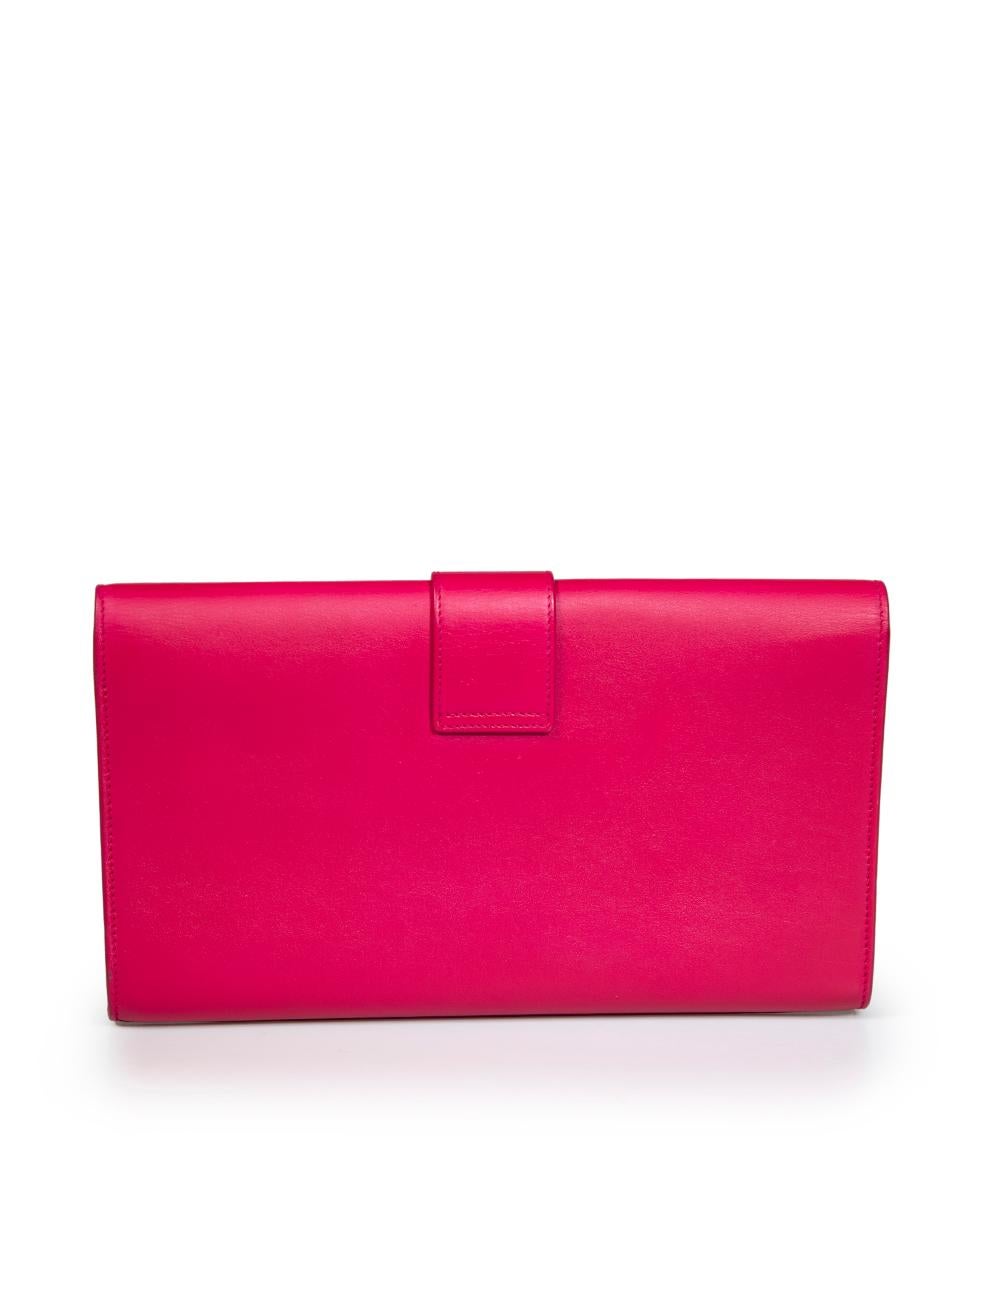 Saint Laurent Fucshia Leather Chyc Clutch In Excellent Condition In London, GB